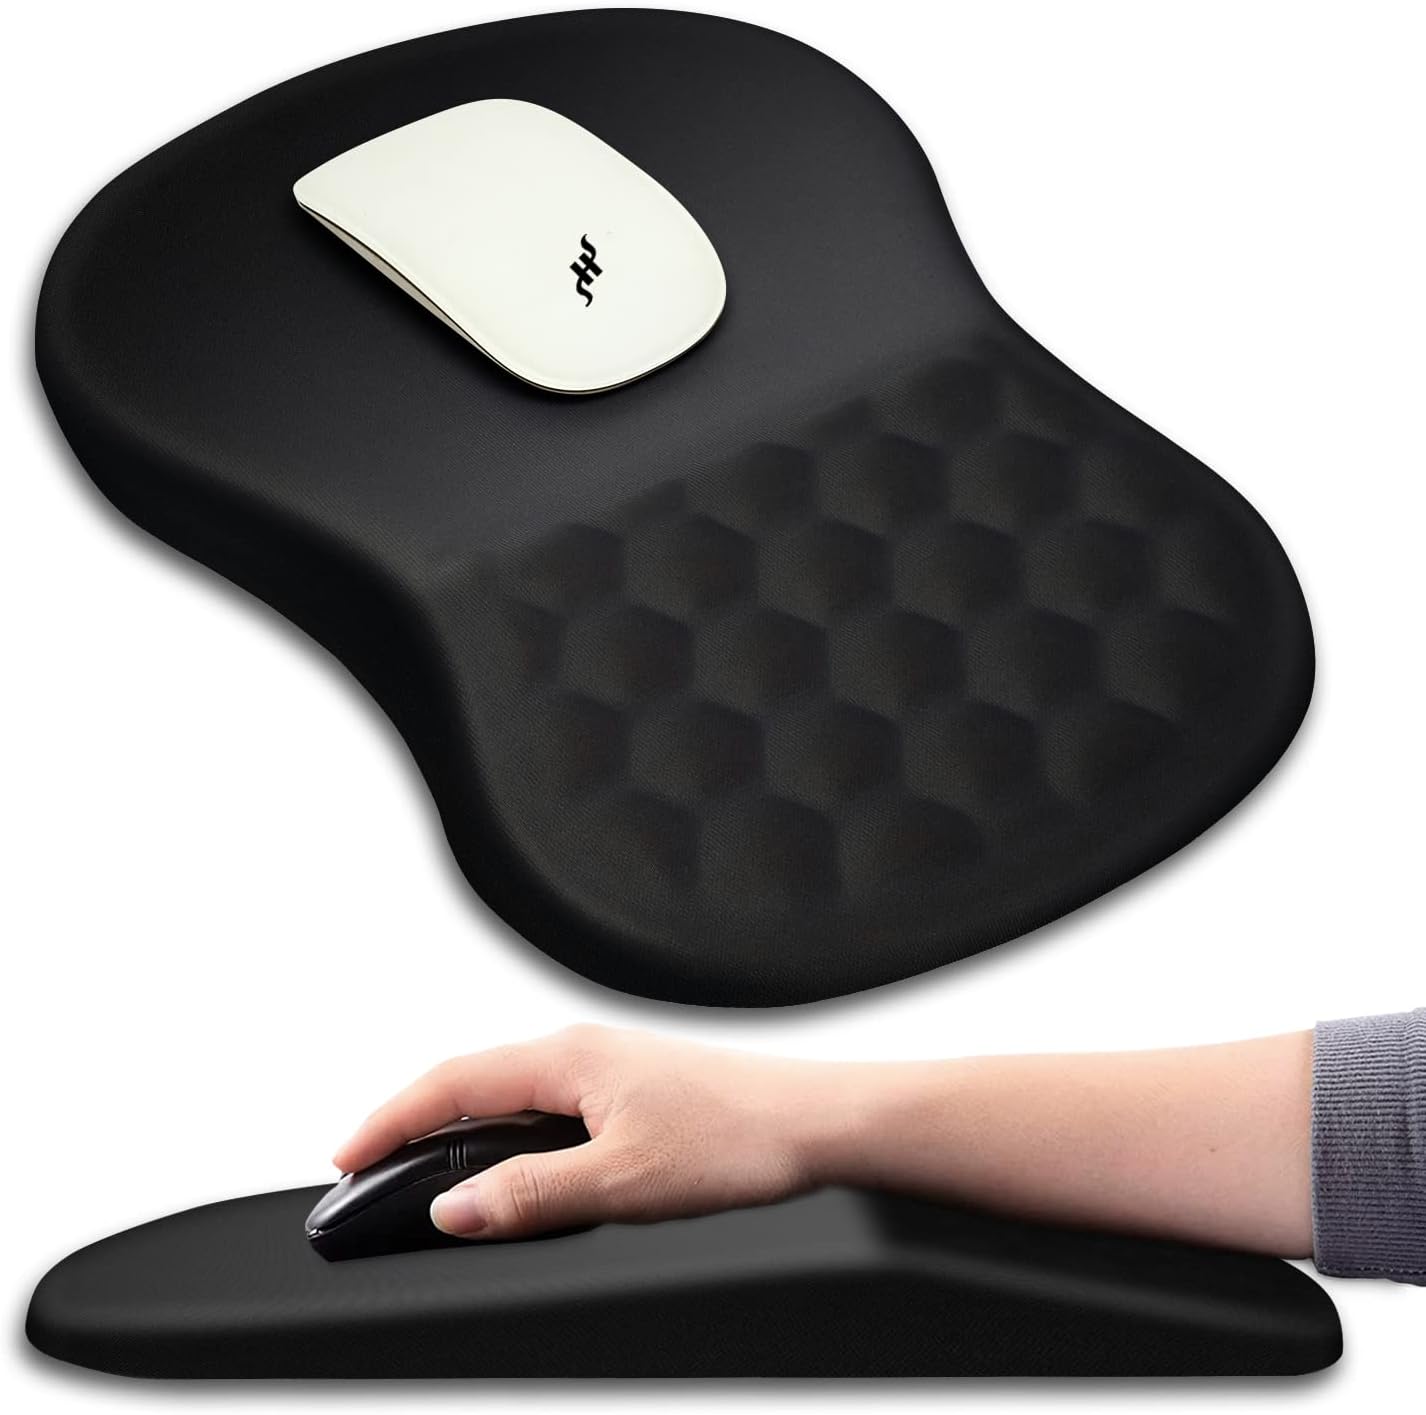 Hokafenle Ergonomic Mouse Pad Wrist Support with Massage Design, Wrist Rest Pain Relief Mousepad with Memory Foam&Non-Slip PU Base, Mouse Pads for Wireless Mouse & Desk (12x8 inch,Black)